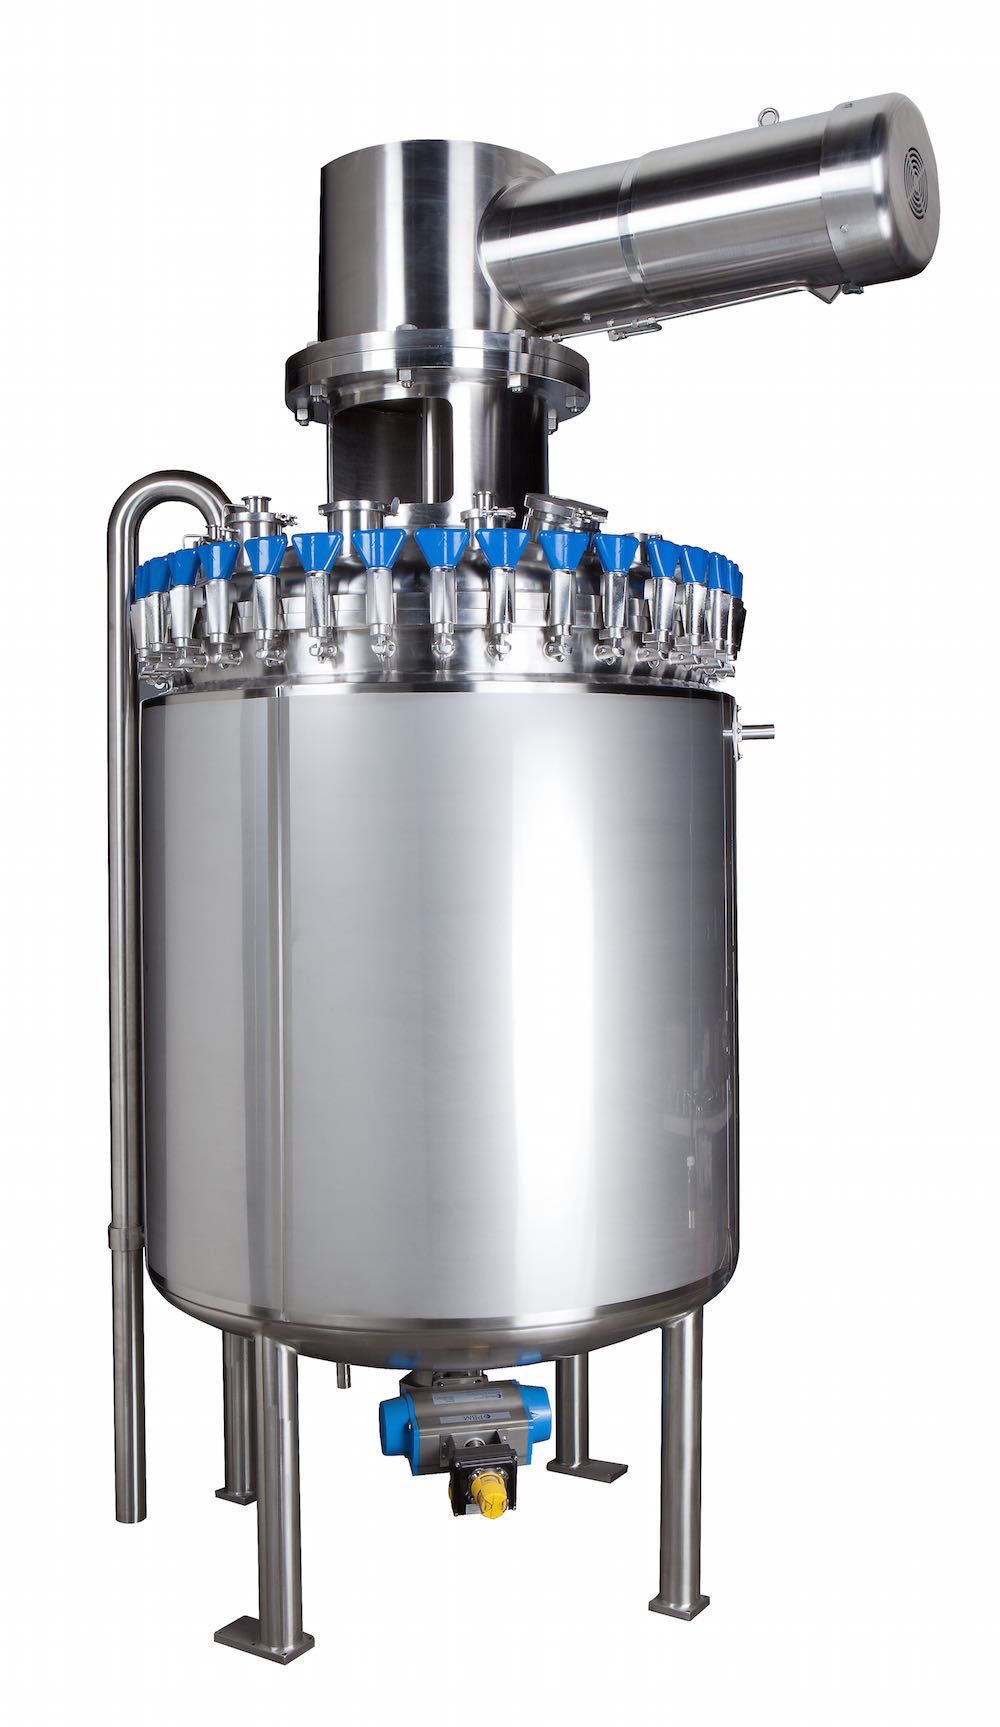 HOLLOWAY proudly produces pharmaceutical stainless steel solutions like this ASME rated pressure vessel.